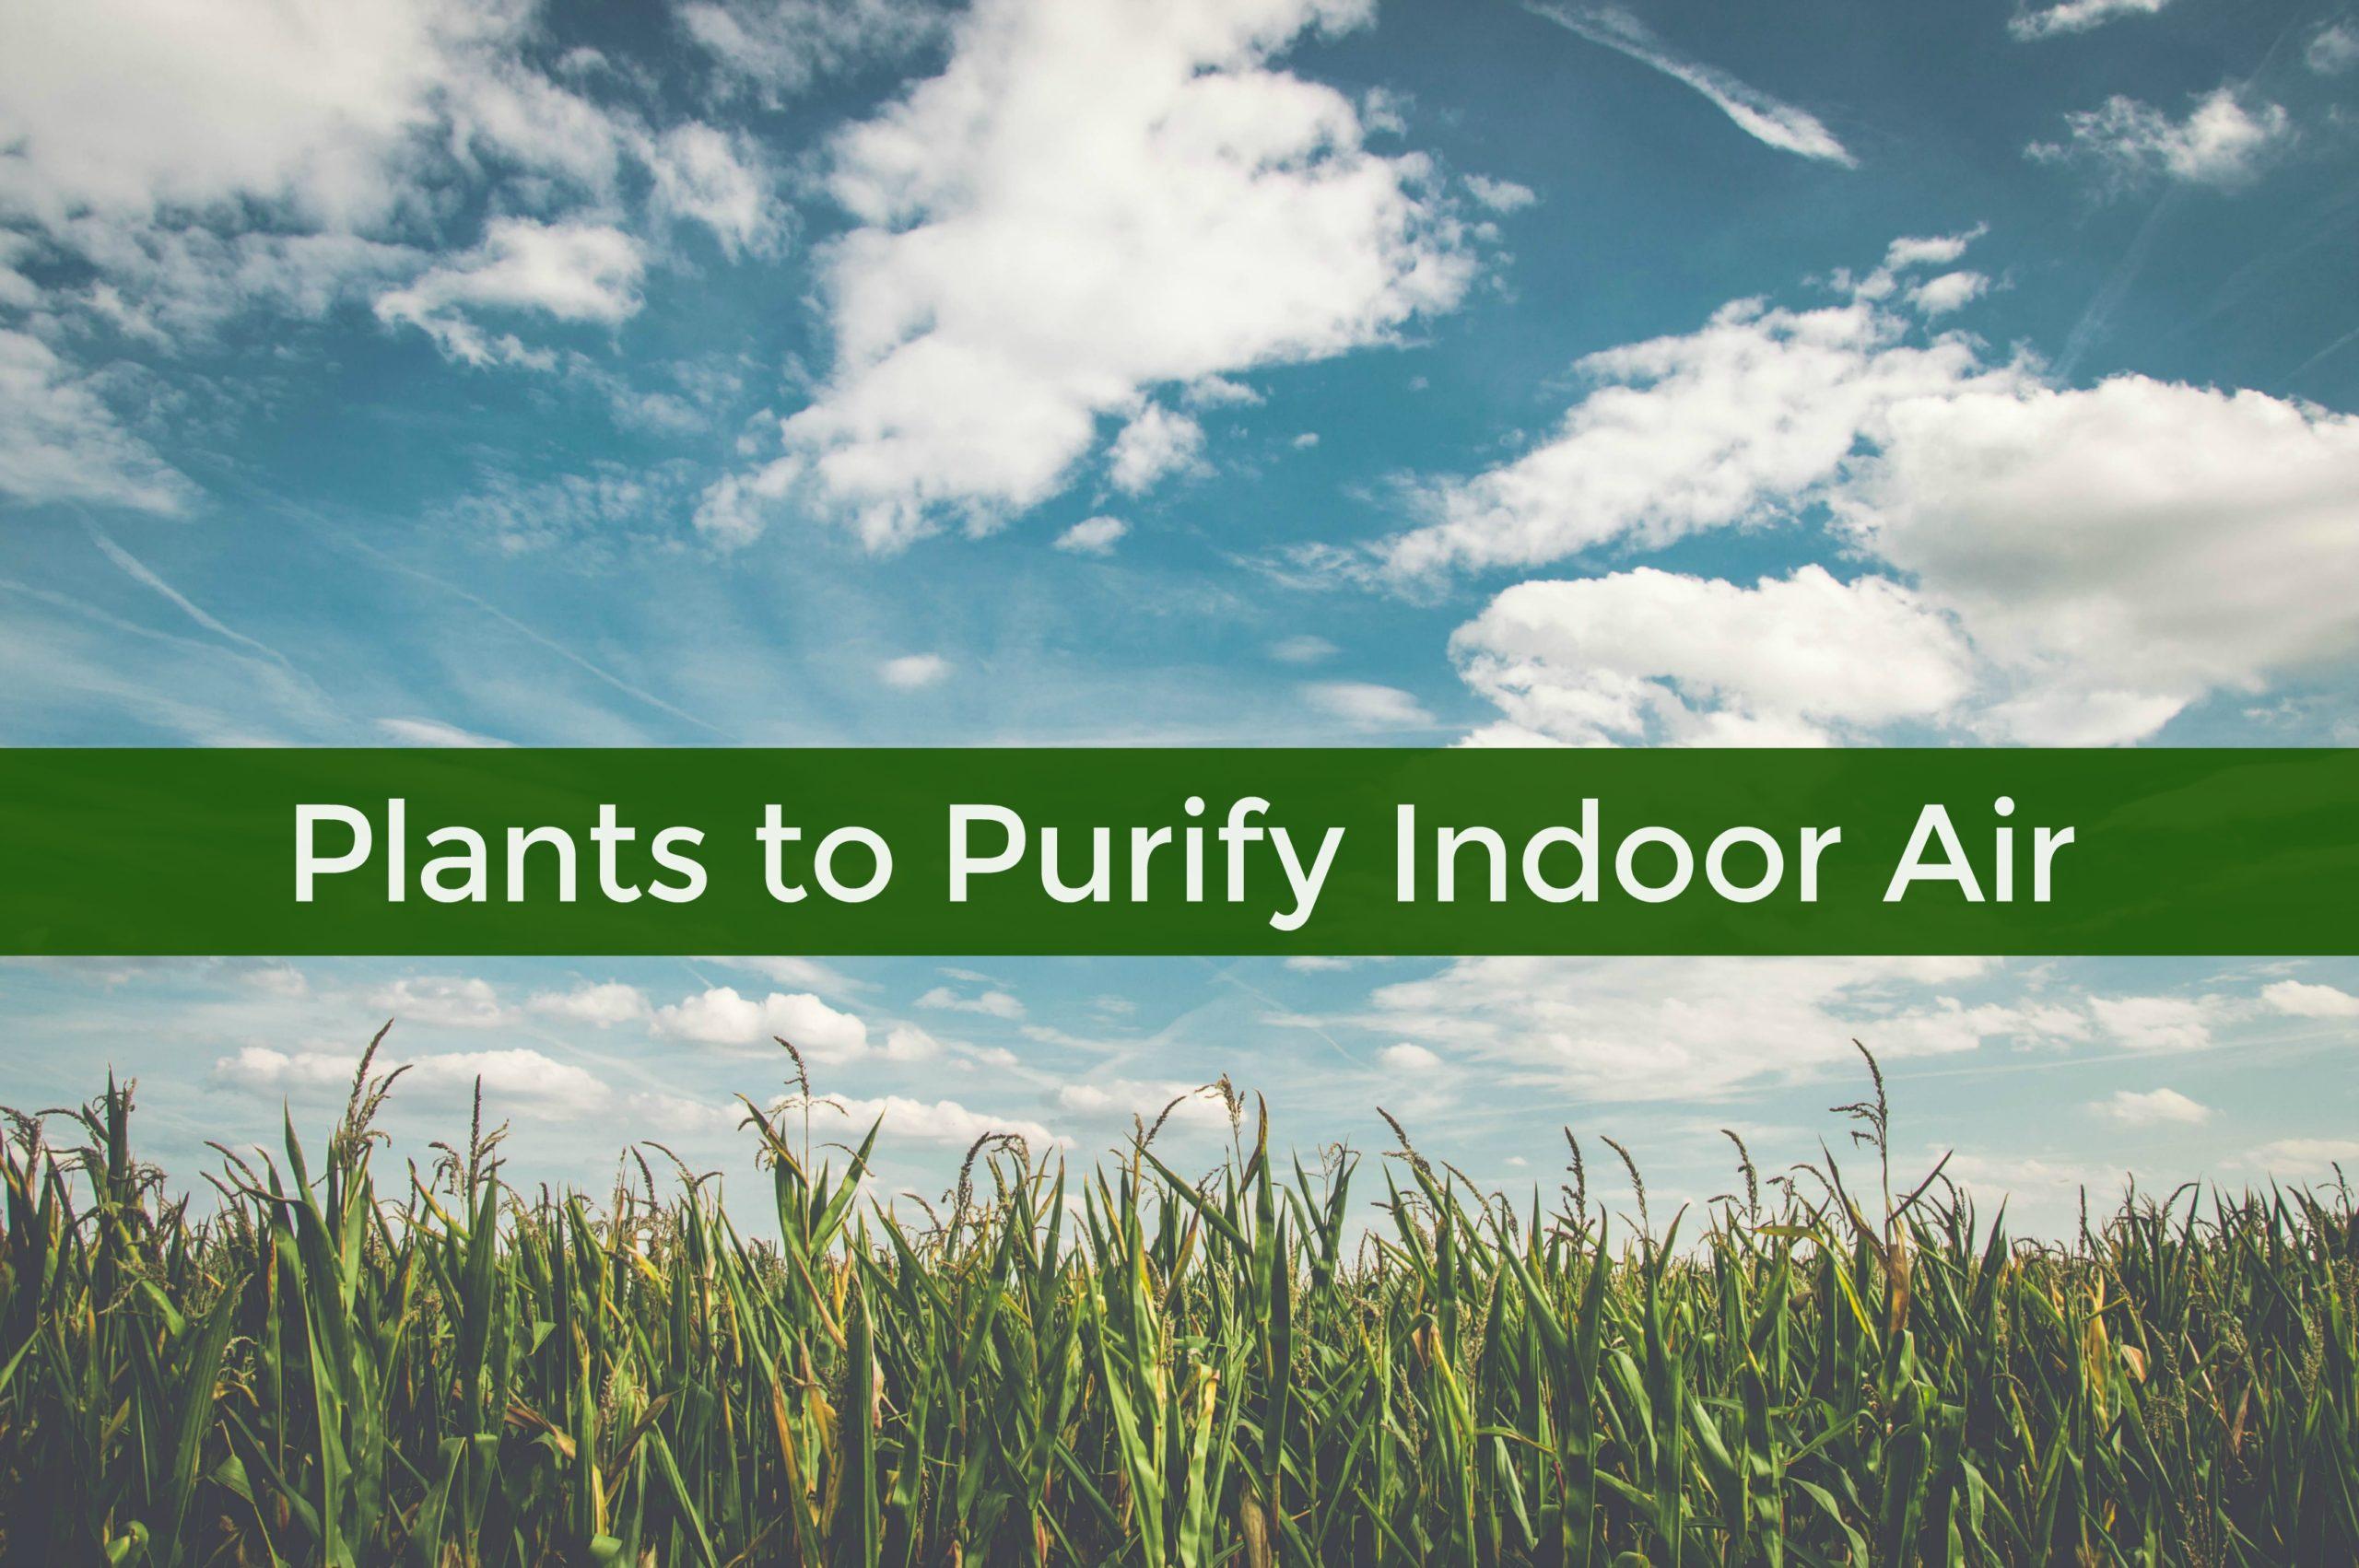 Purifying Indoor Air with Plants